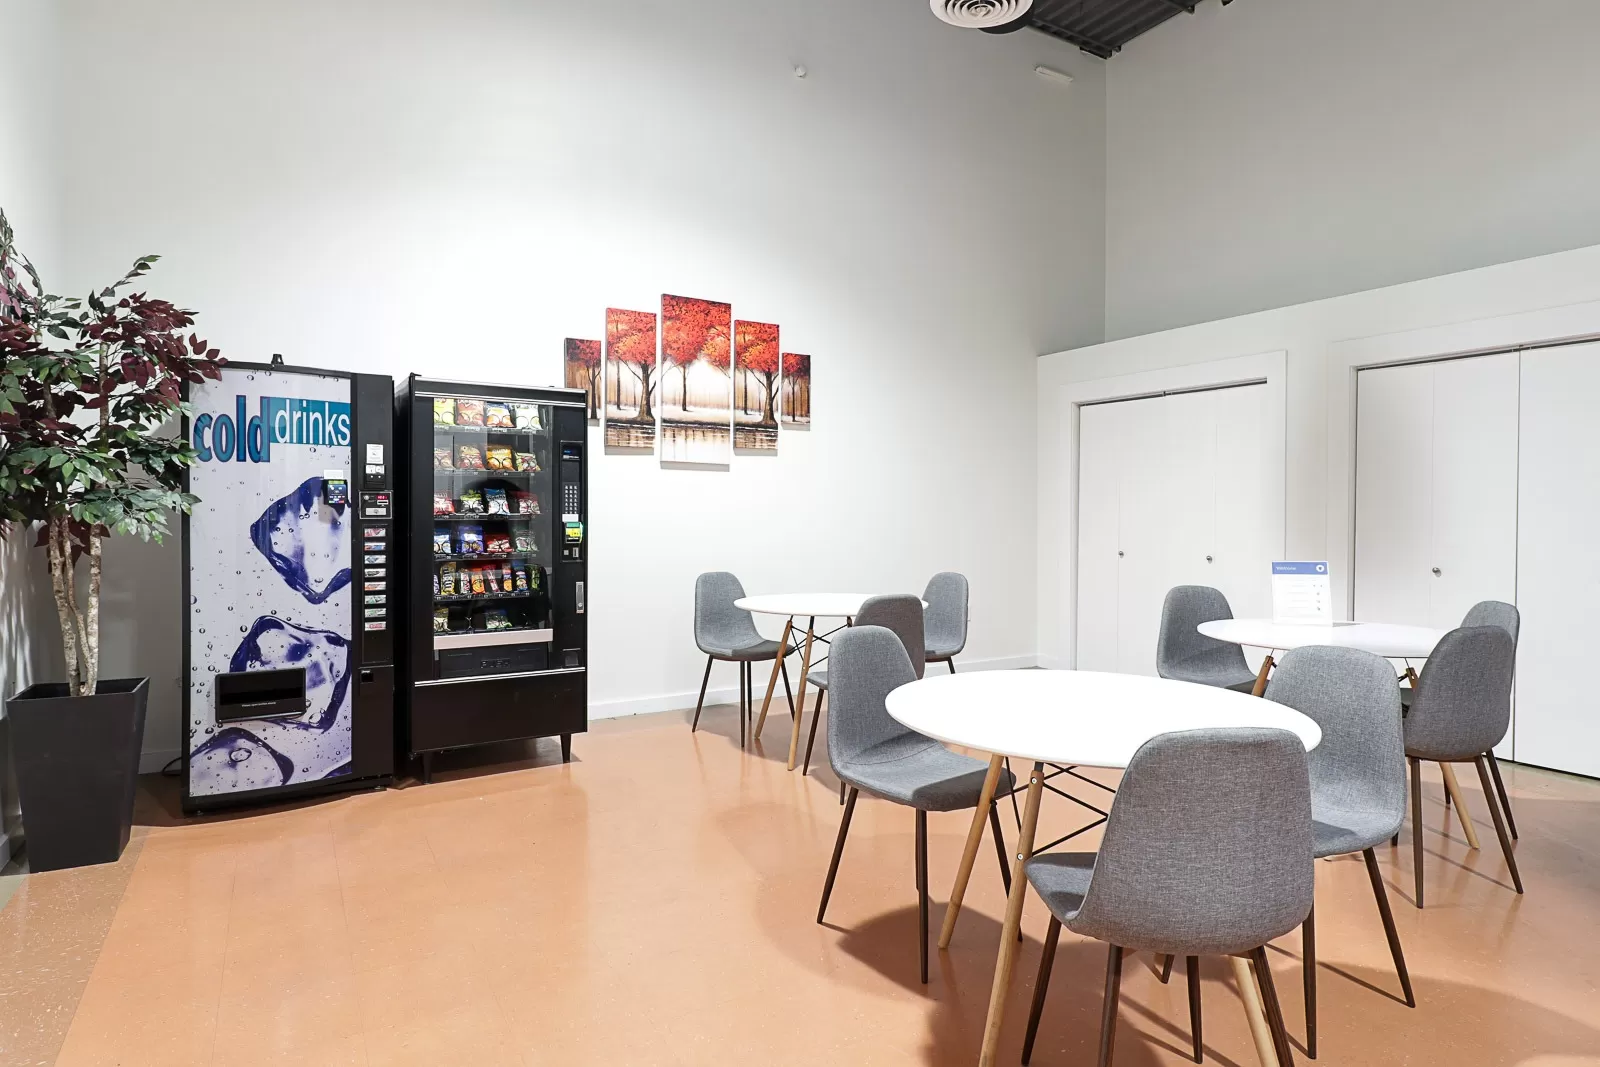 A room with chairs, tables and a vending machine.